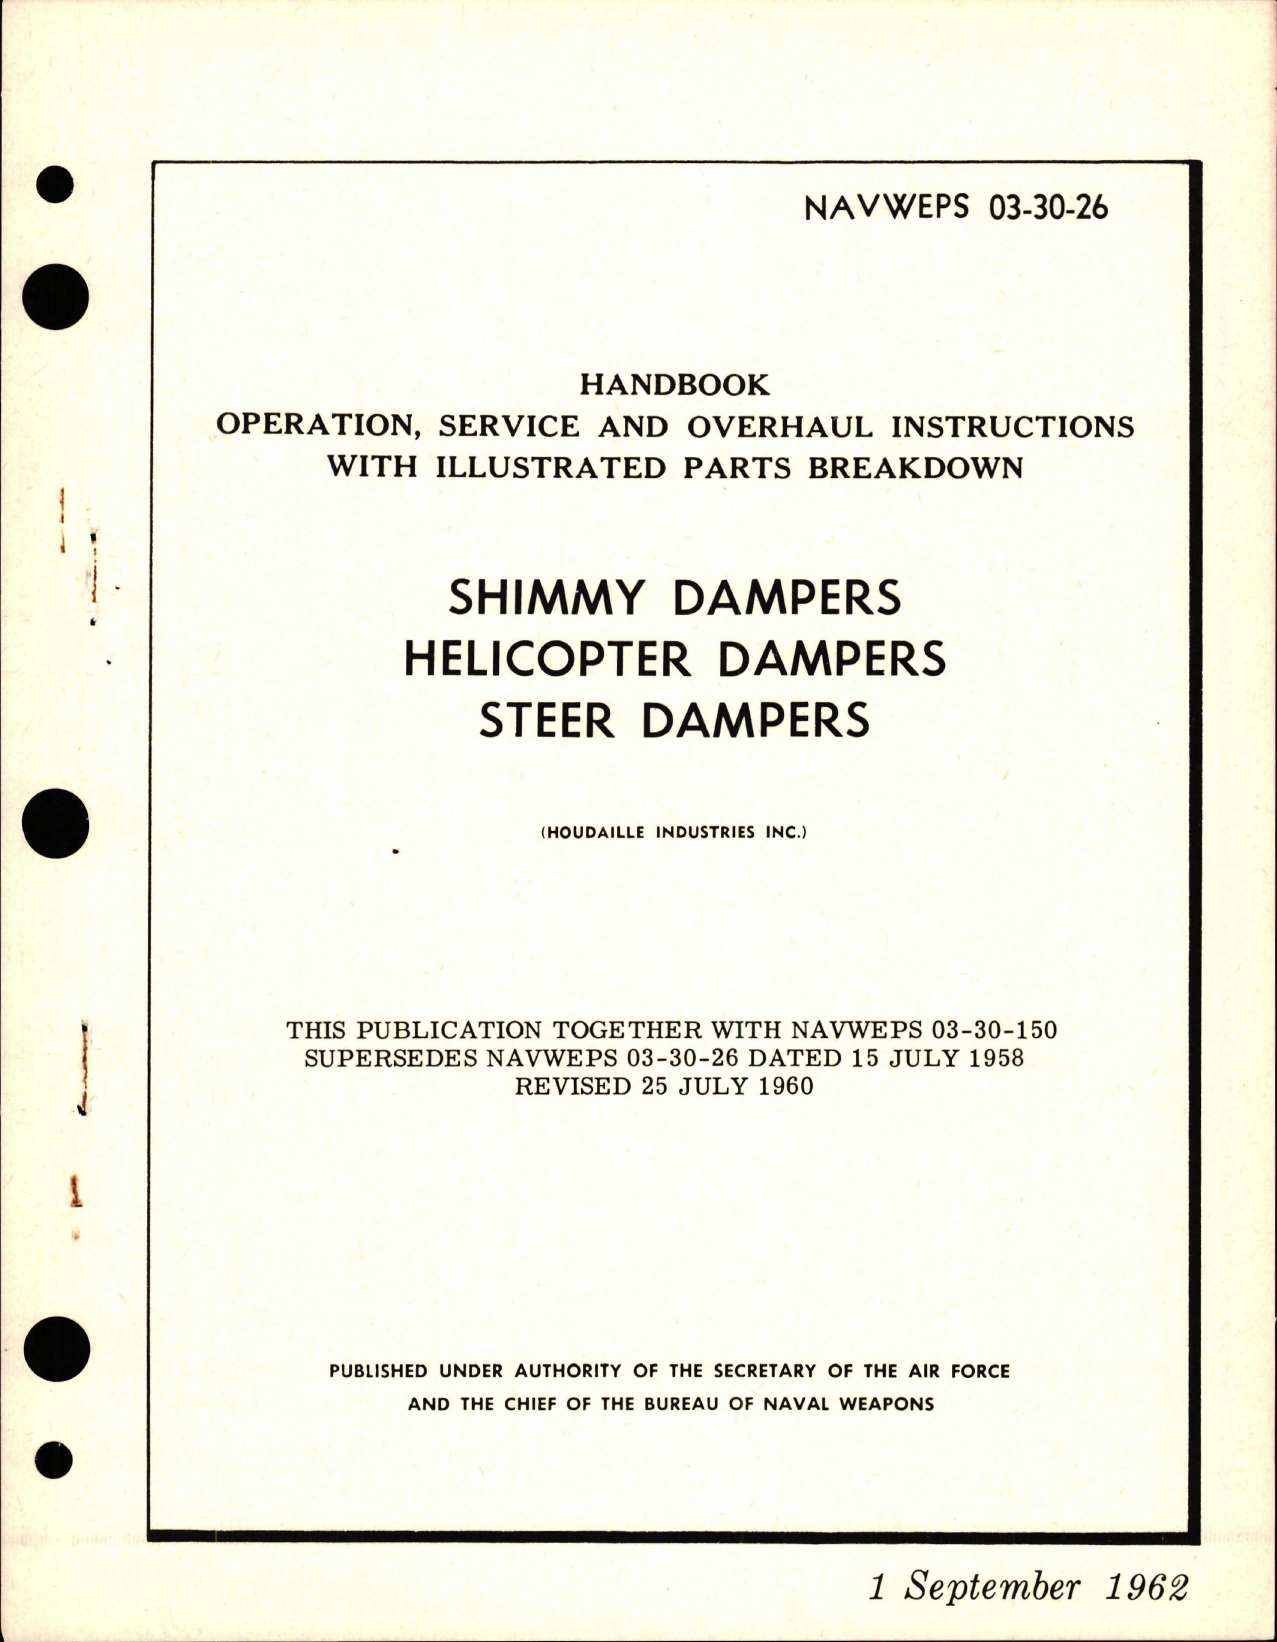 Sample page 1 from AirCorps Library document: Operation, Service and Overhaul Instructions with Illustrated Parts for Shimmy Dampers - Helicopter Dampers - Steer Dampers